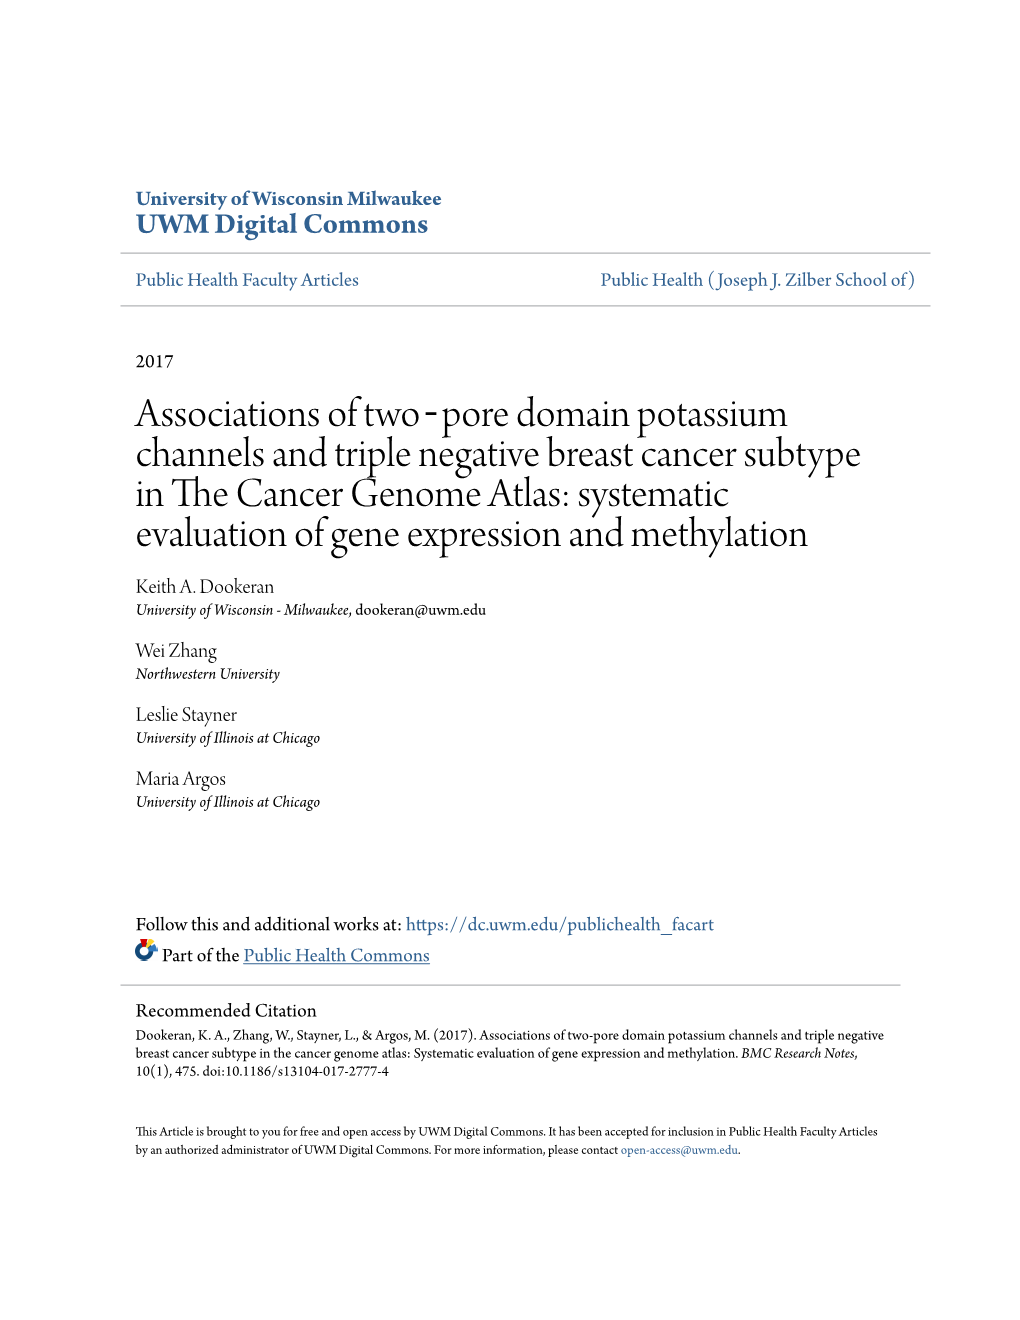 Associations of Two‑Pore Domain Potassium Channels and Triple